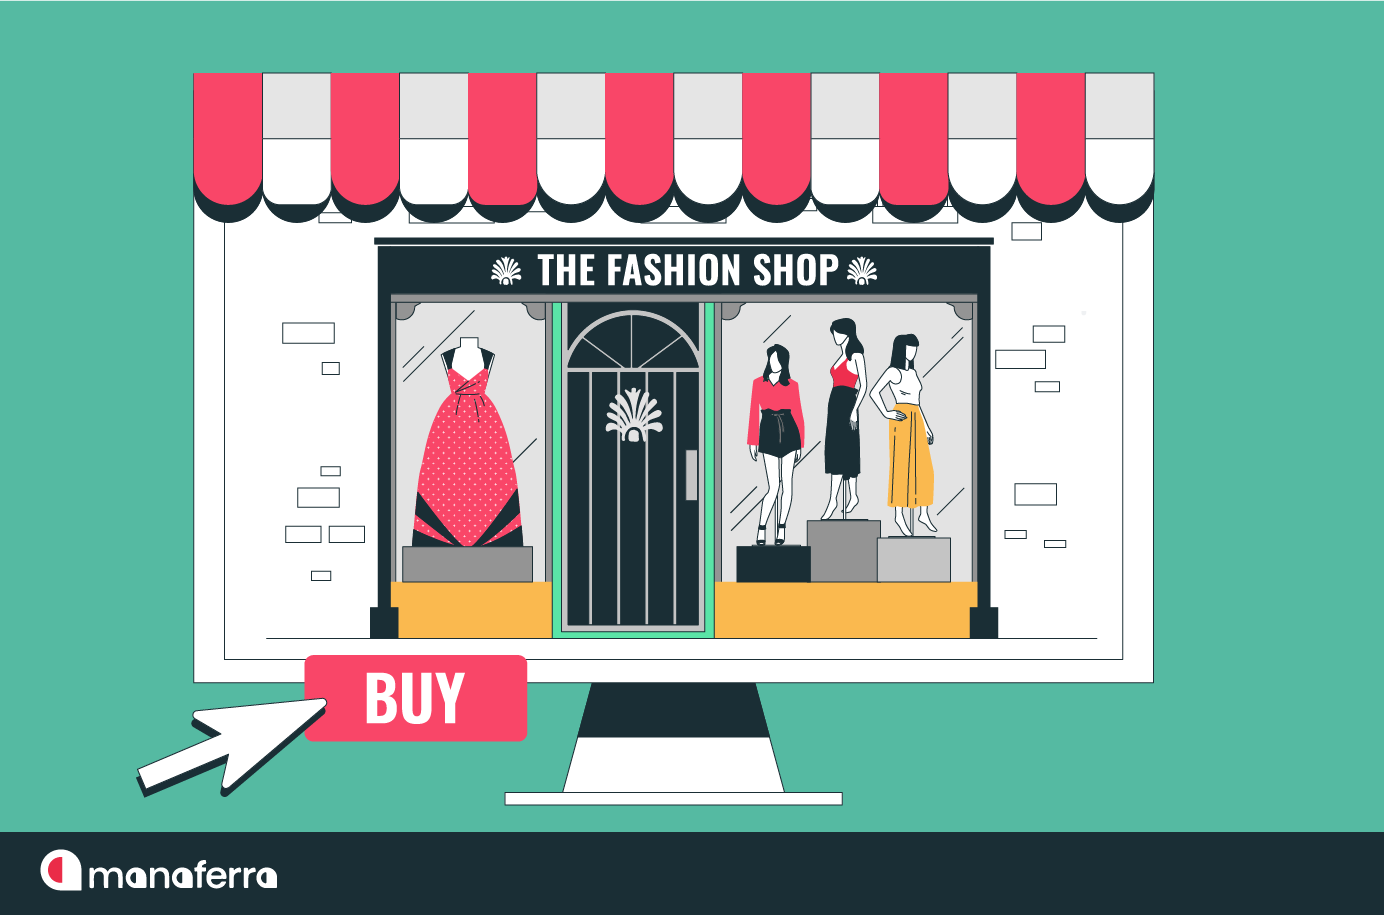 Best 7 SEO Tips for Fashion eCommerce